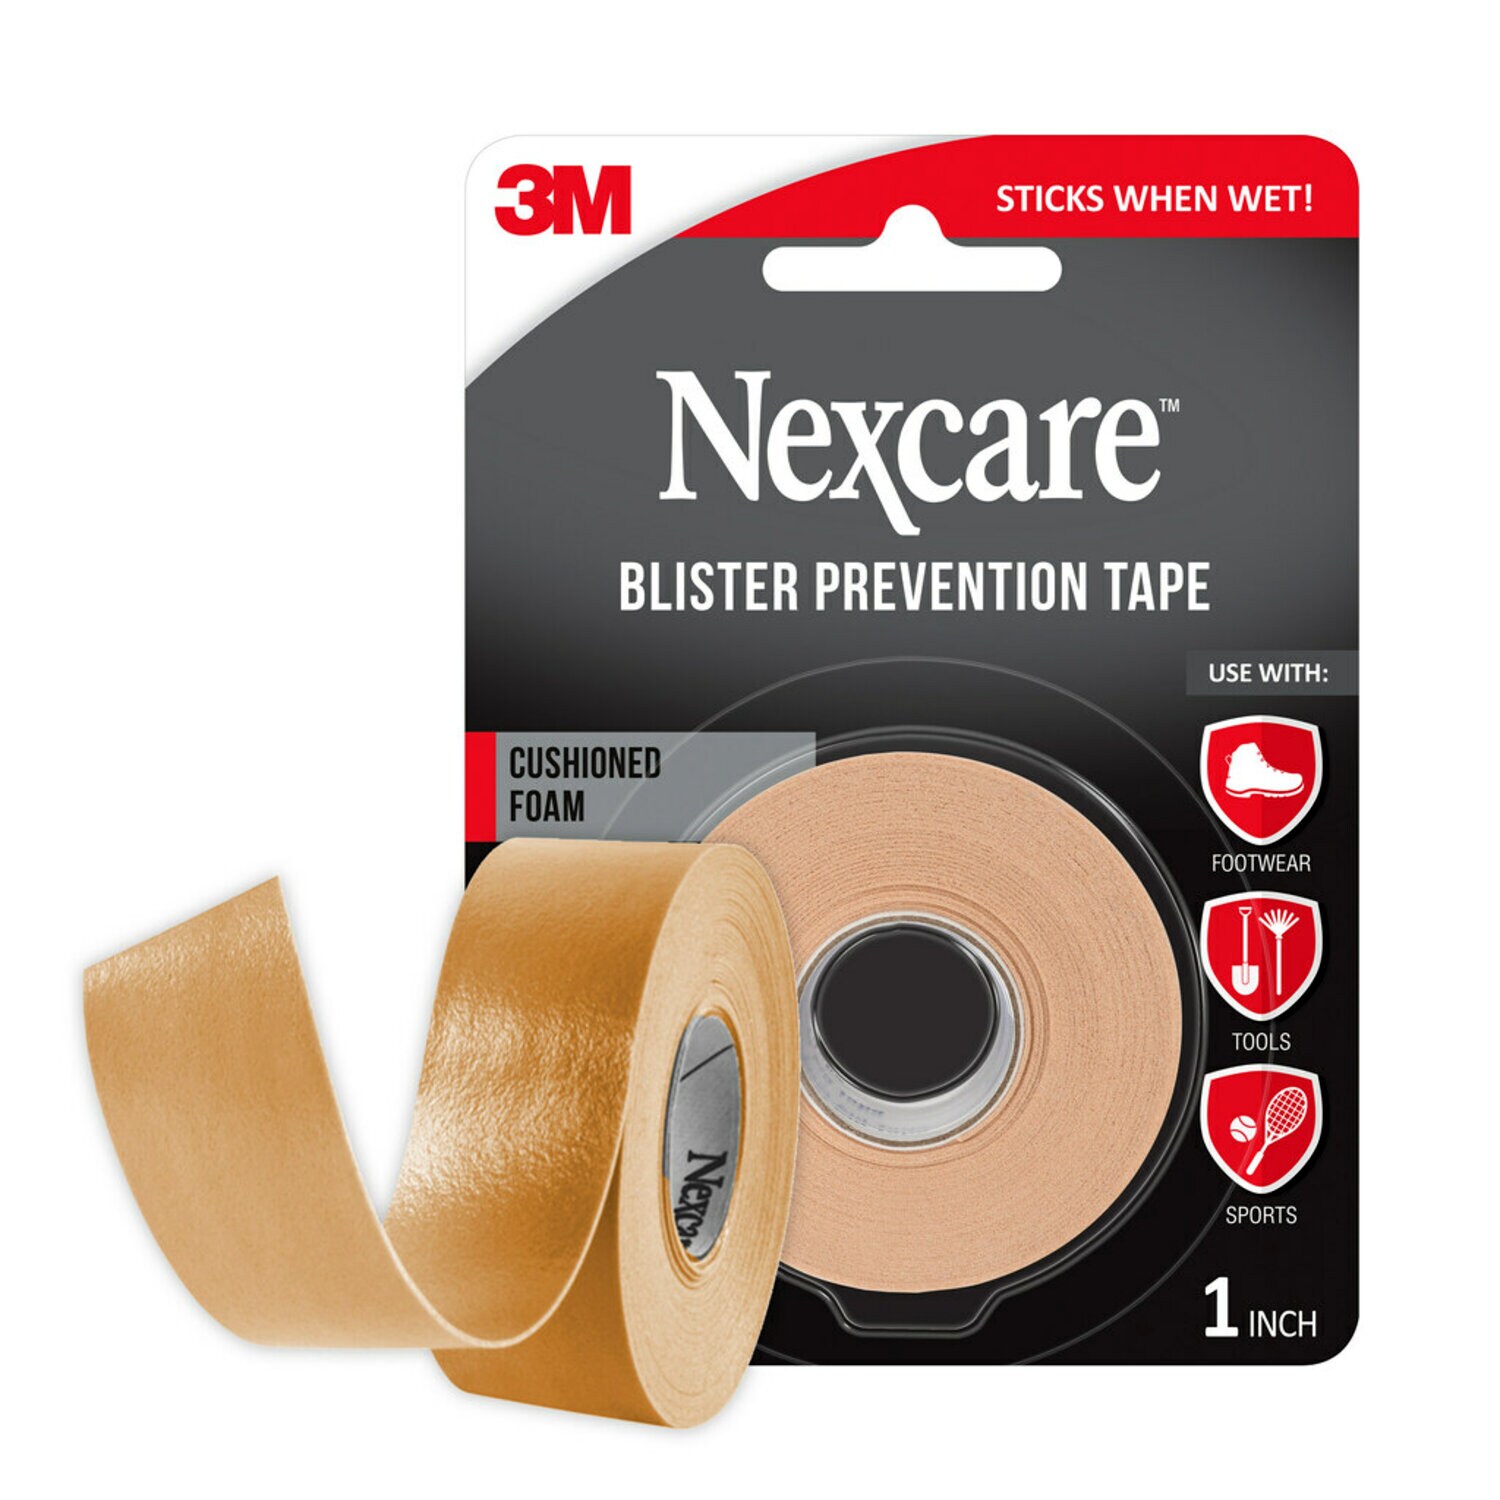 7100184891 - Nexcare Blister Prevention Tape 731-BPT, 1 in x 180 in (25.4mm x 4.57m)